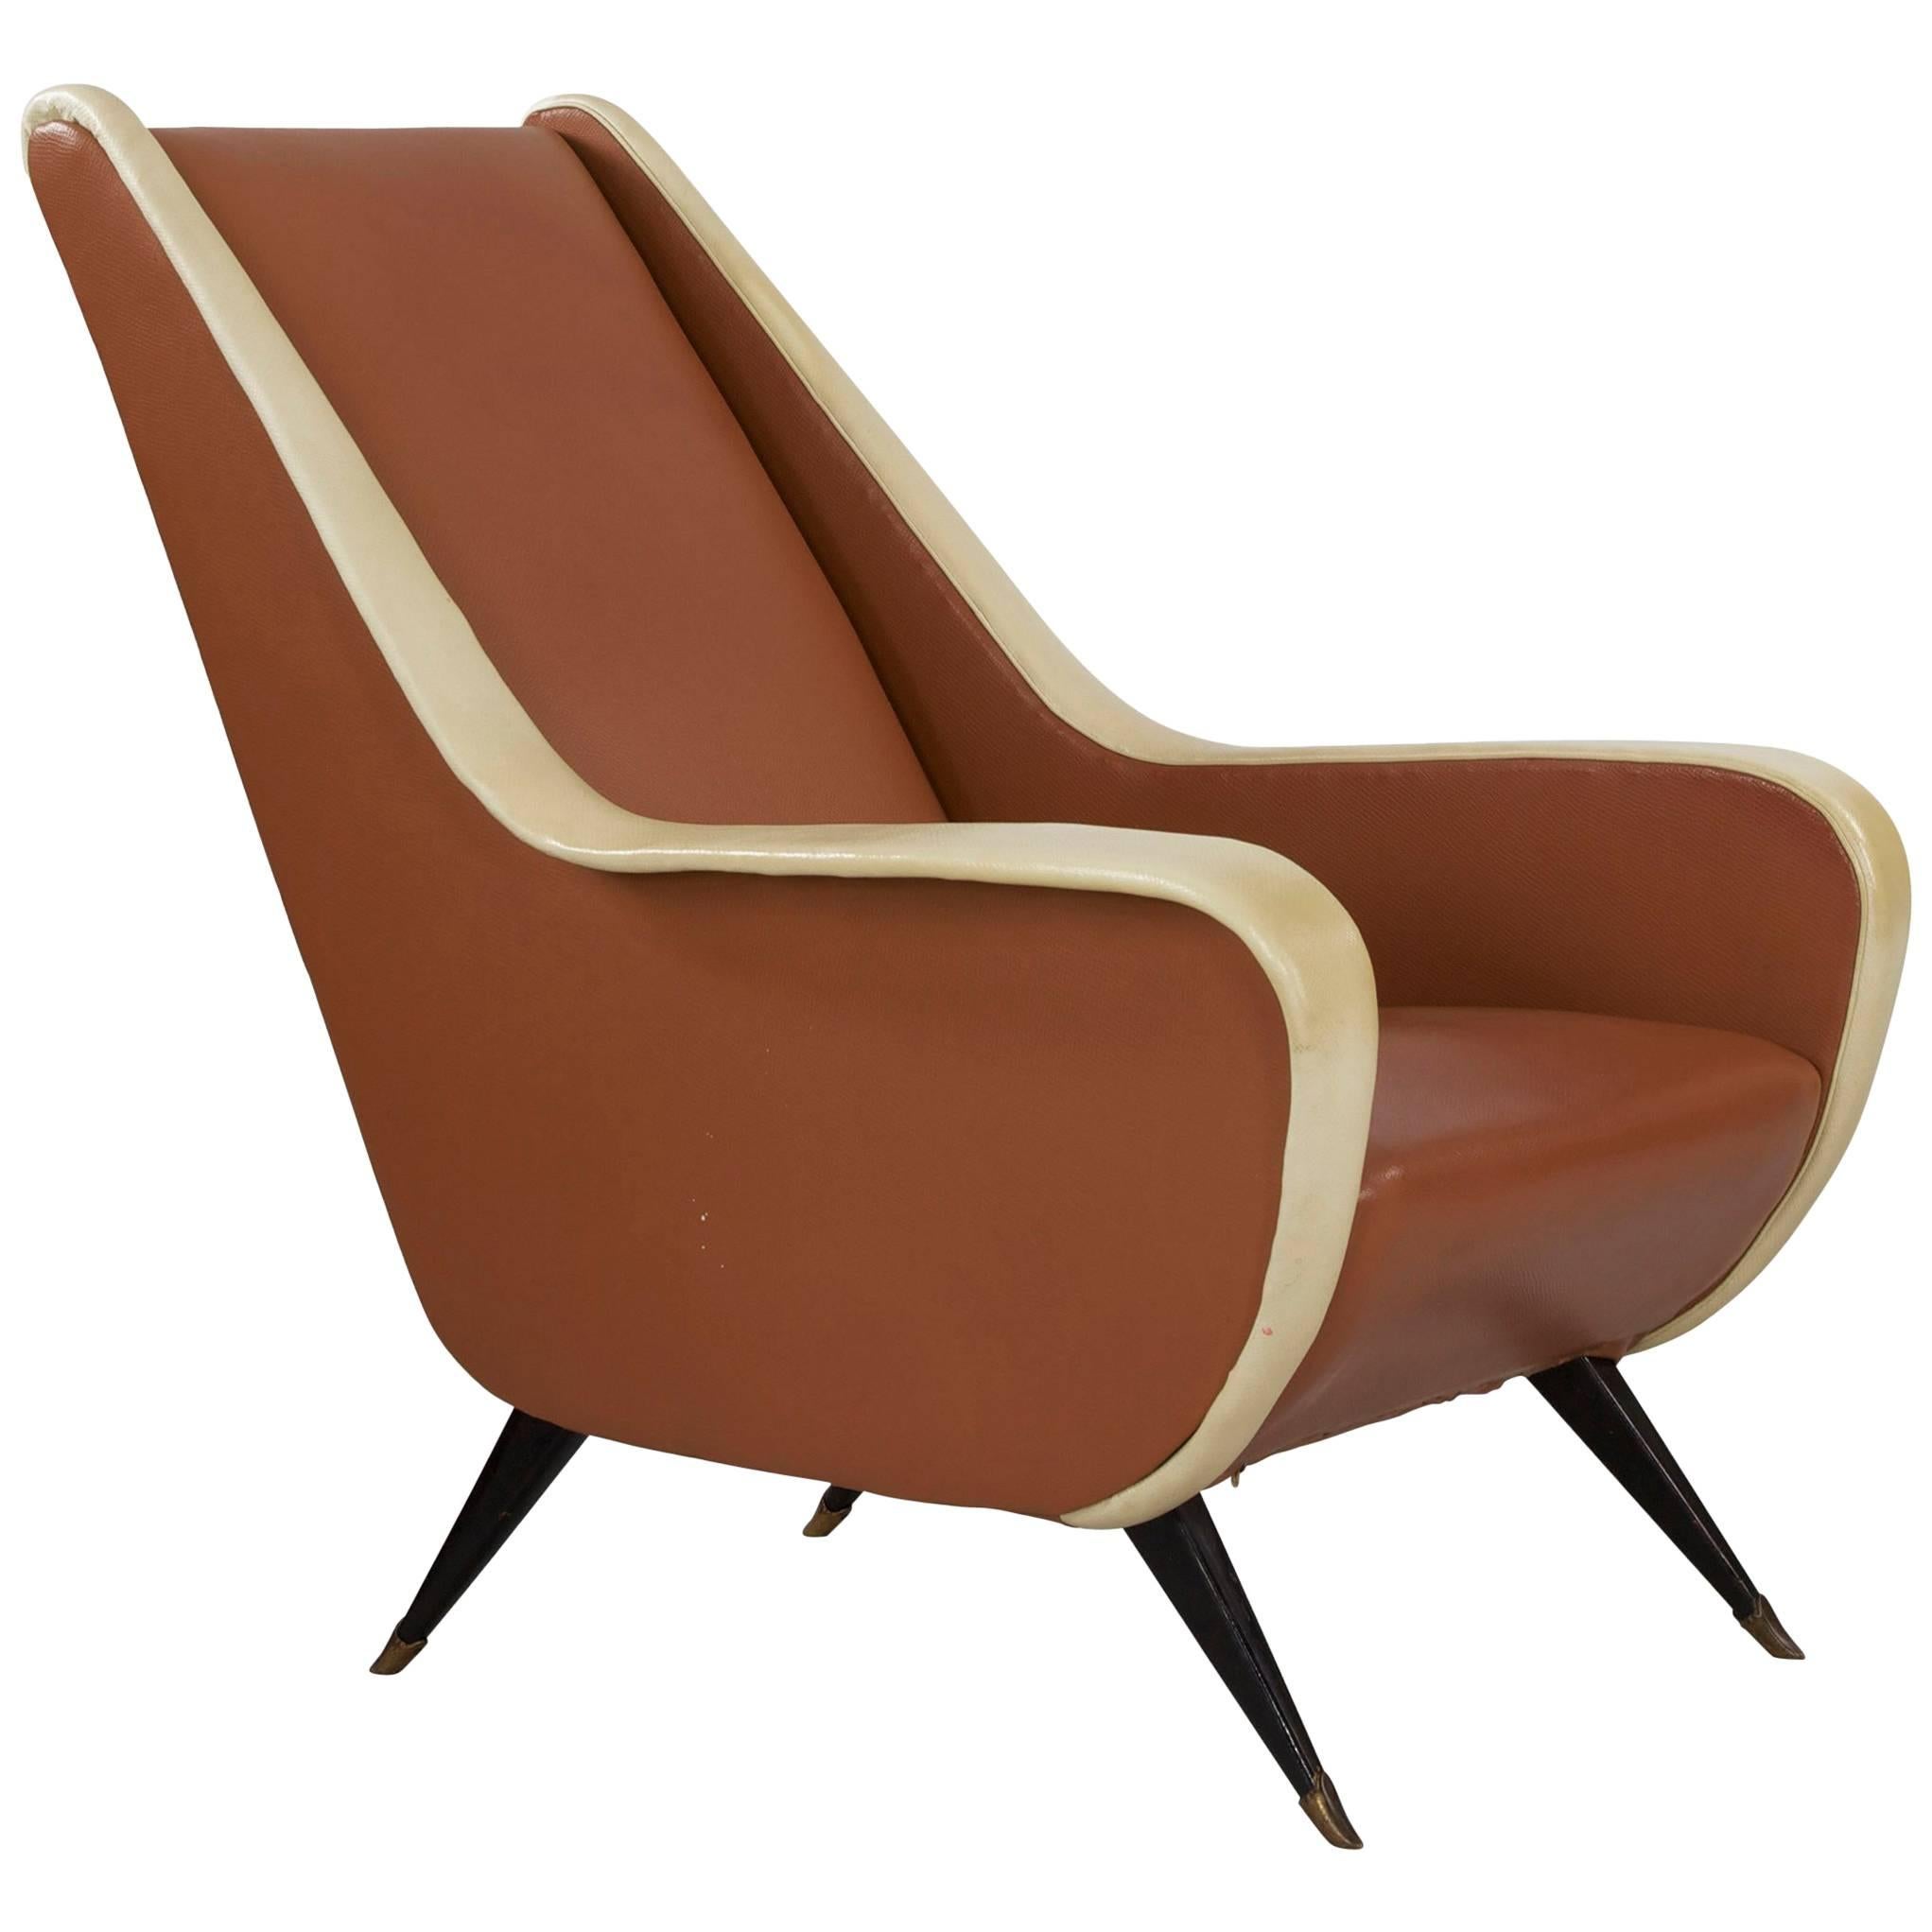 Italian Chair in Two-Tone Look of Brown and Beige Faux Leather, 1950